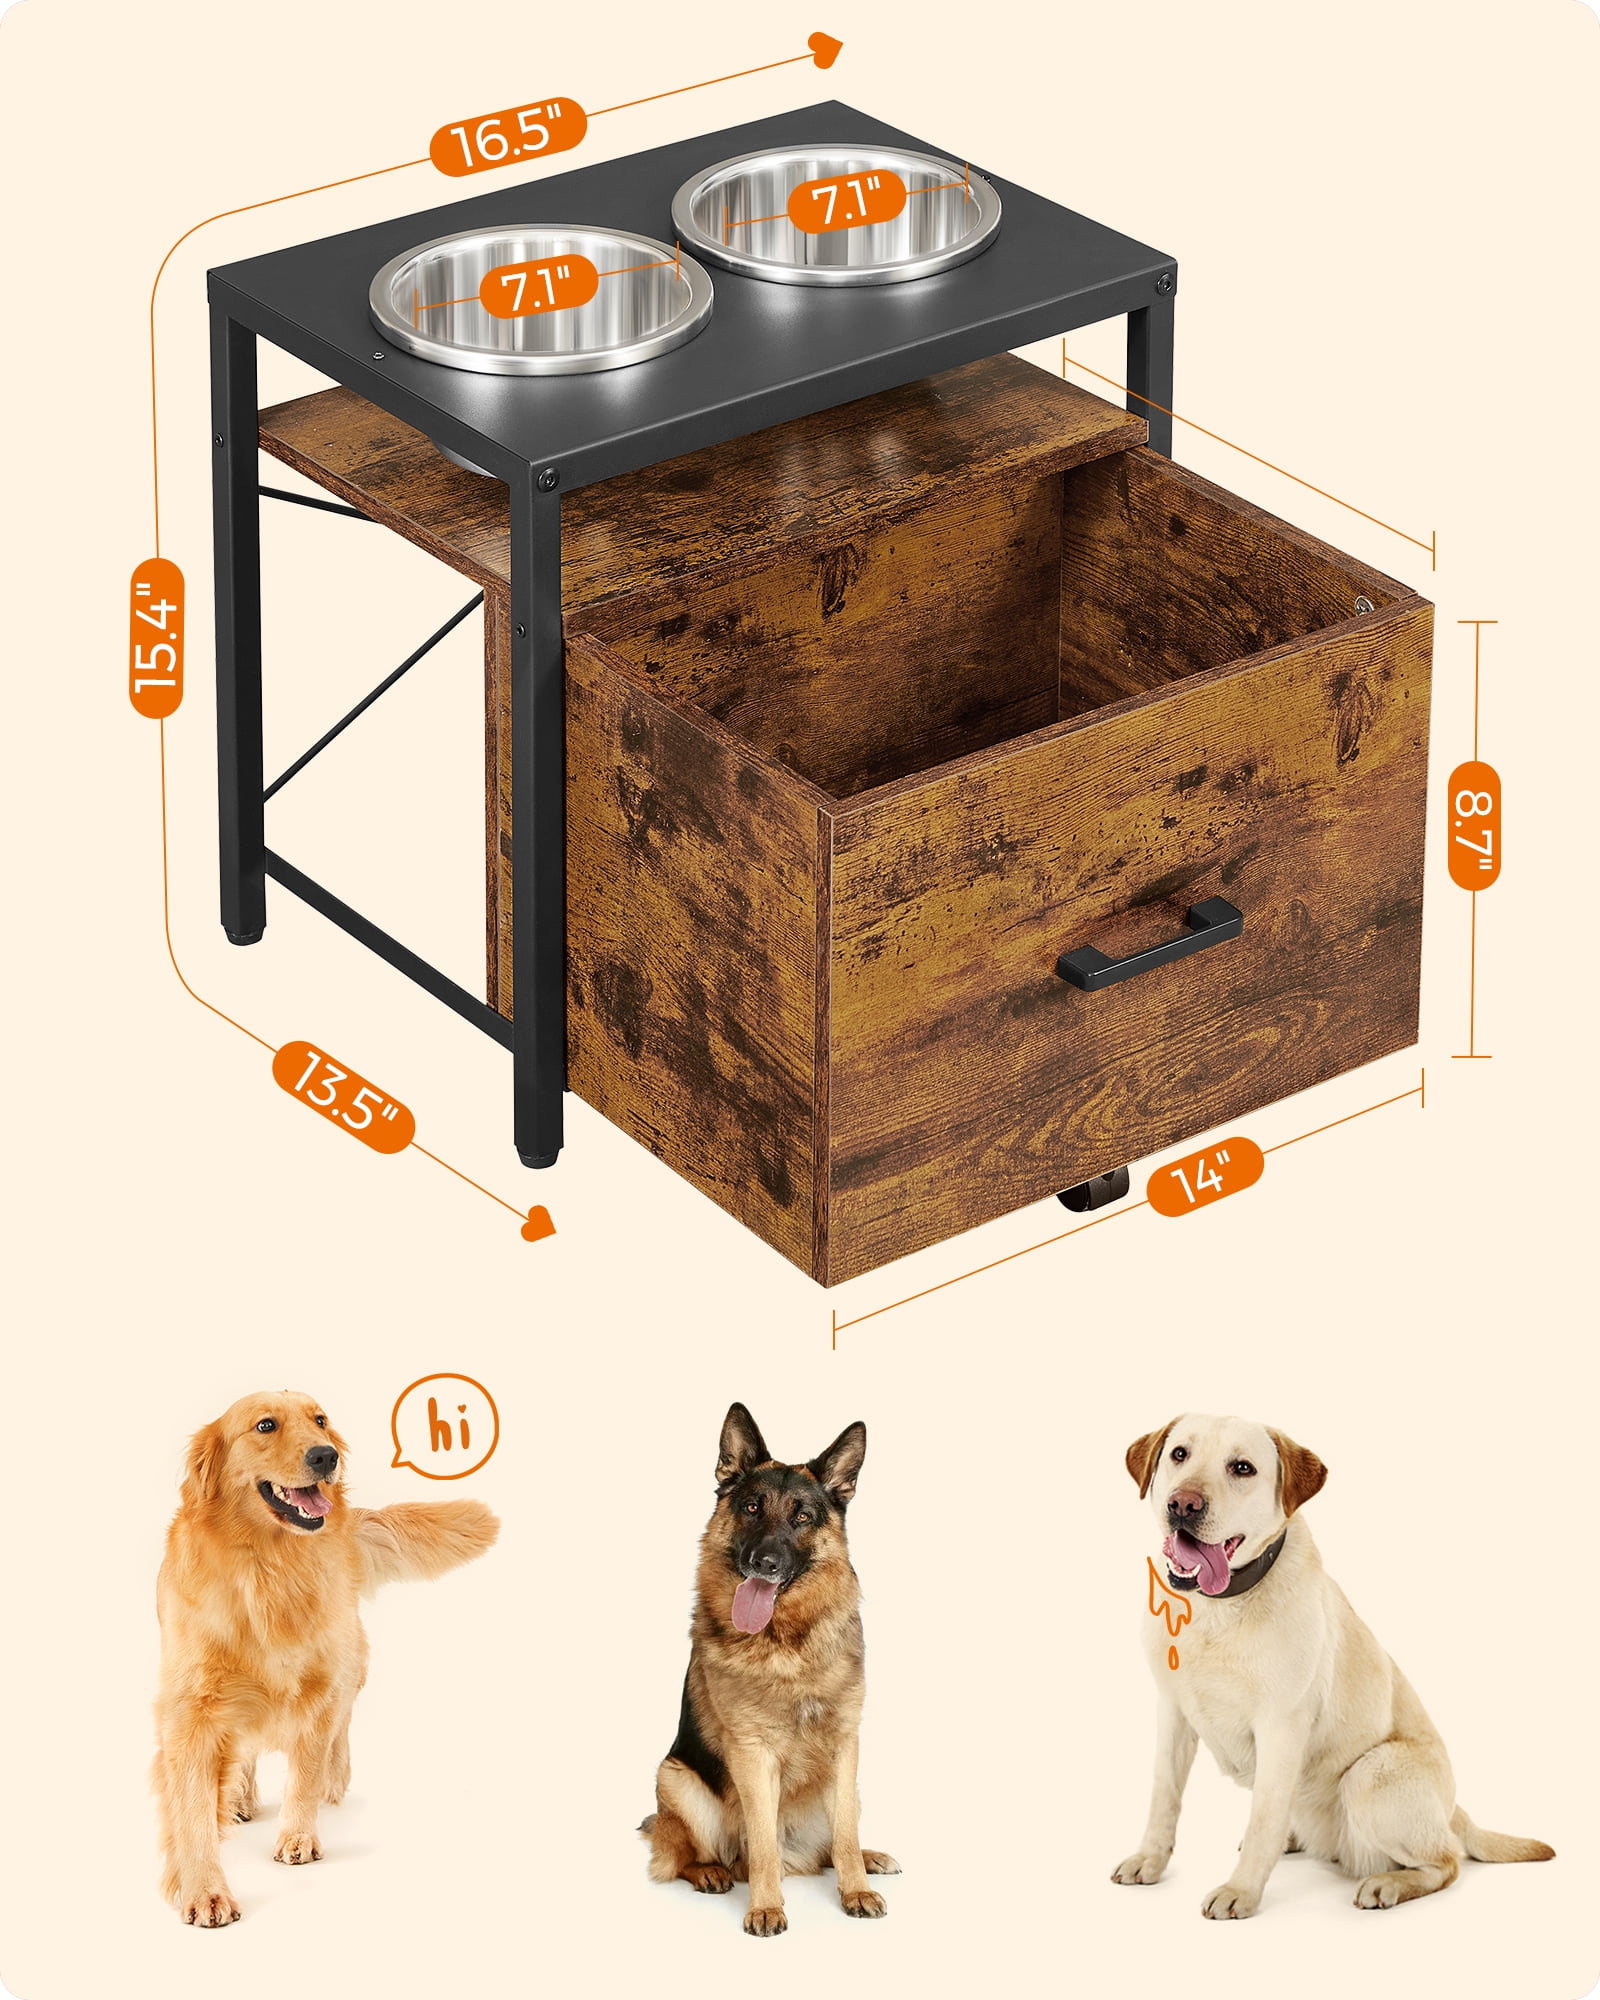 Dog Bowl Stand With Storage Perfect for Two Large Dogs. Rustic Feeder,  Raised Dog Feeder 